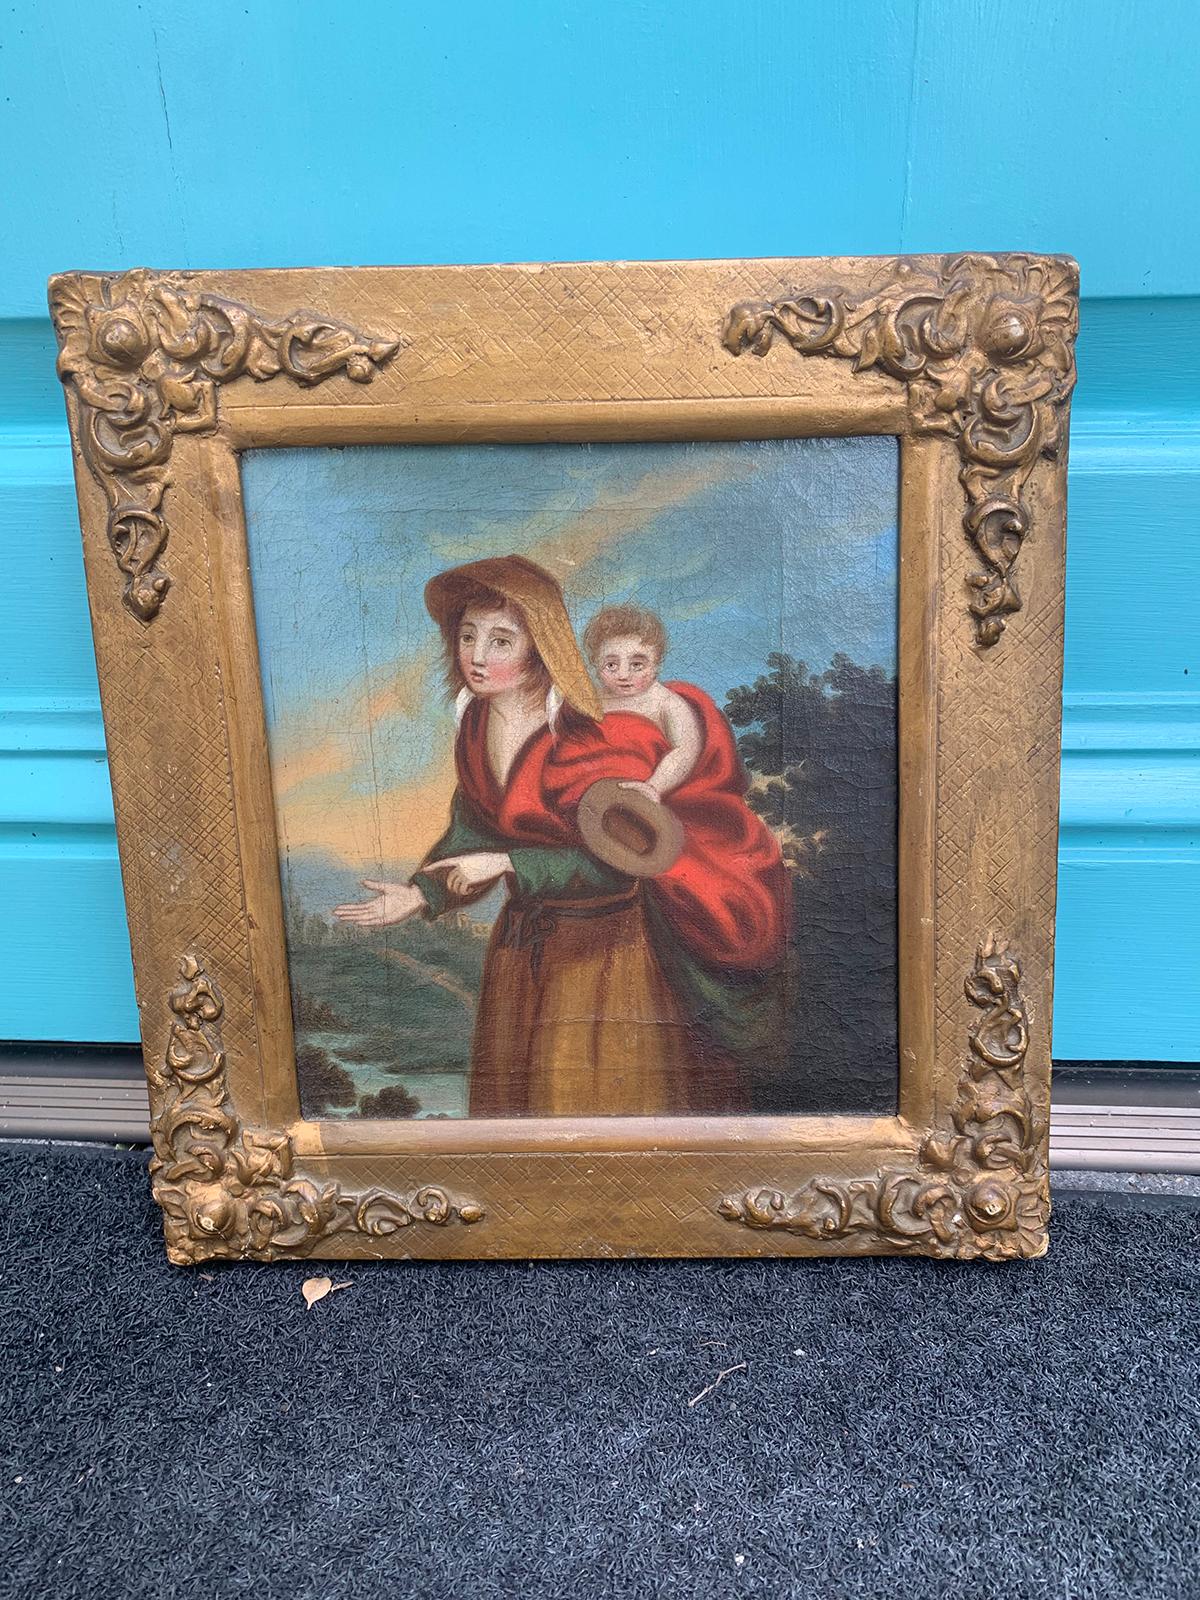 Probably 18th century framed continental painting of mother with child.